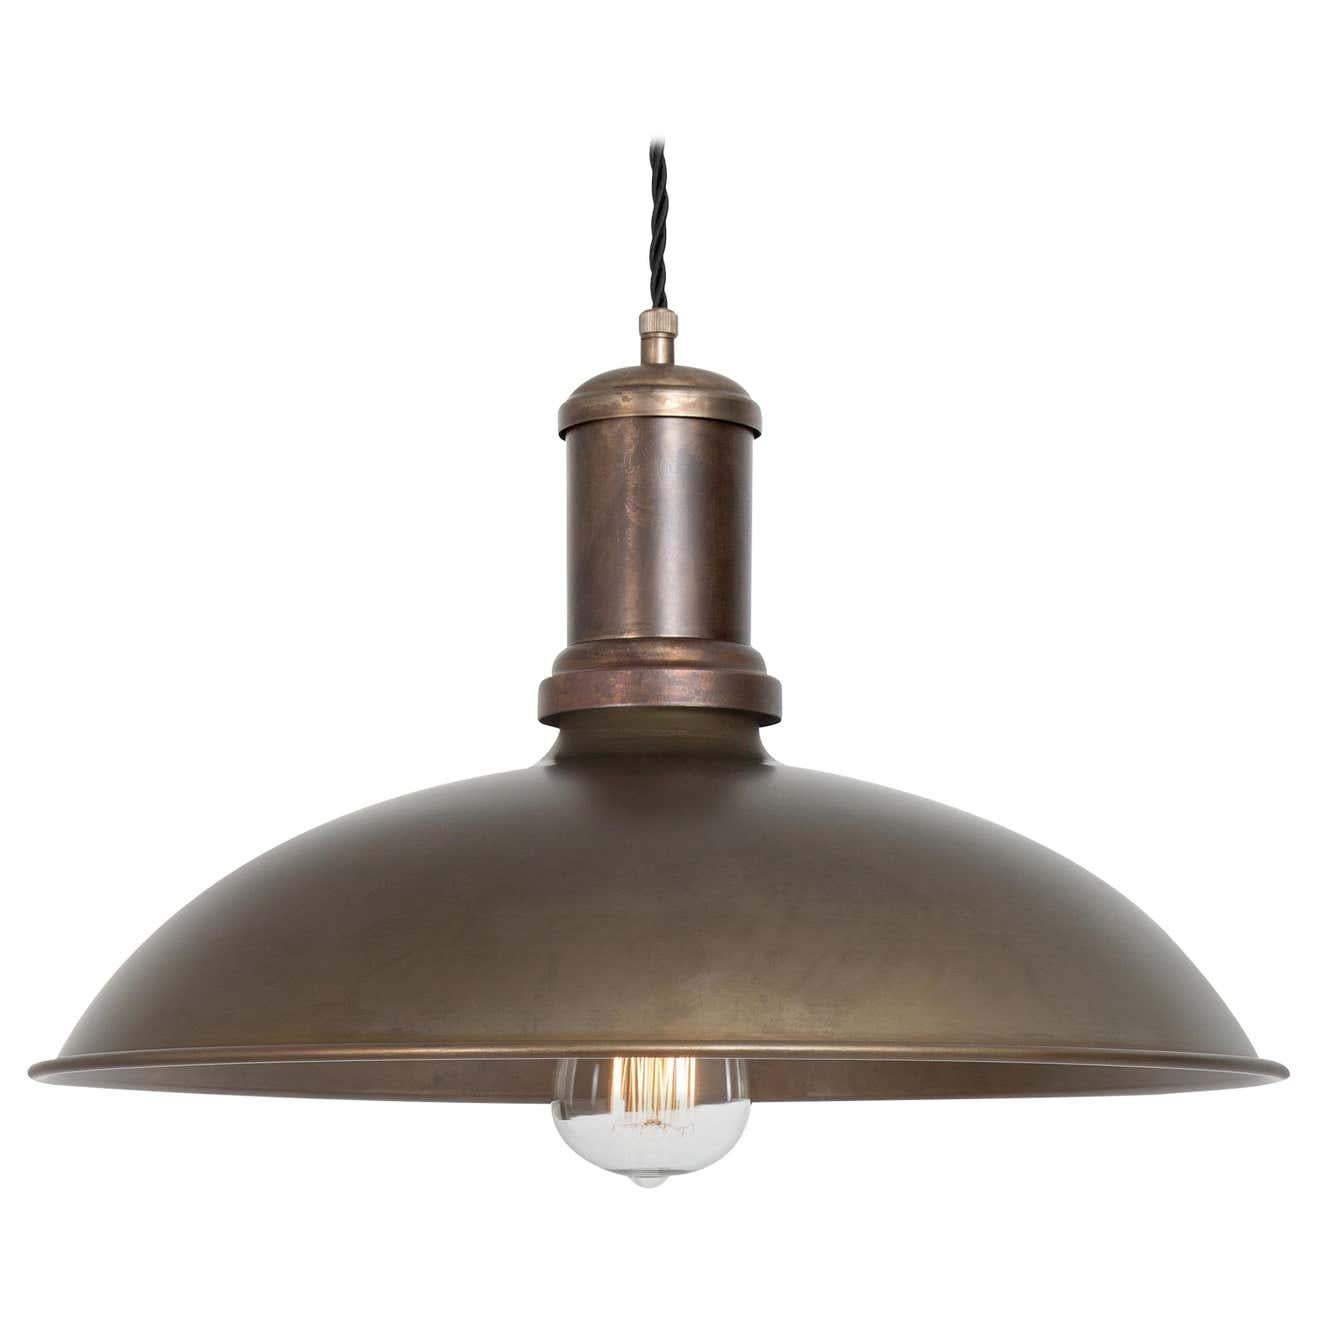 Brass Sabina Grubbeson Large Kavaljer Iron Oxide Ceiling Lamp by Konsthantverk For Sale